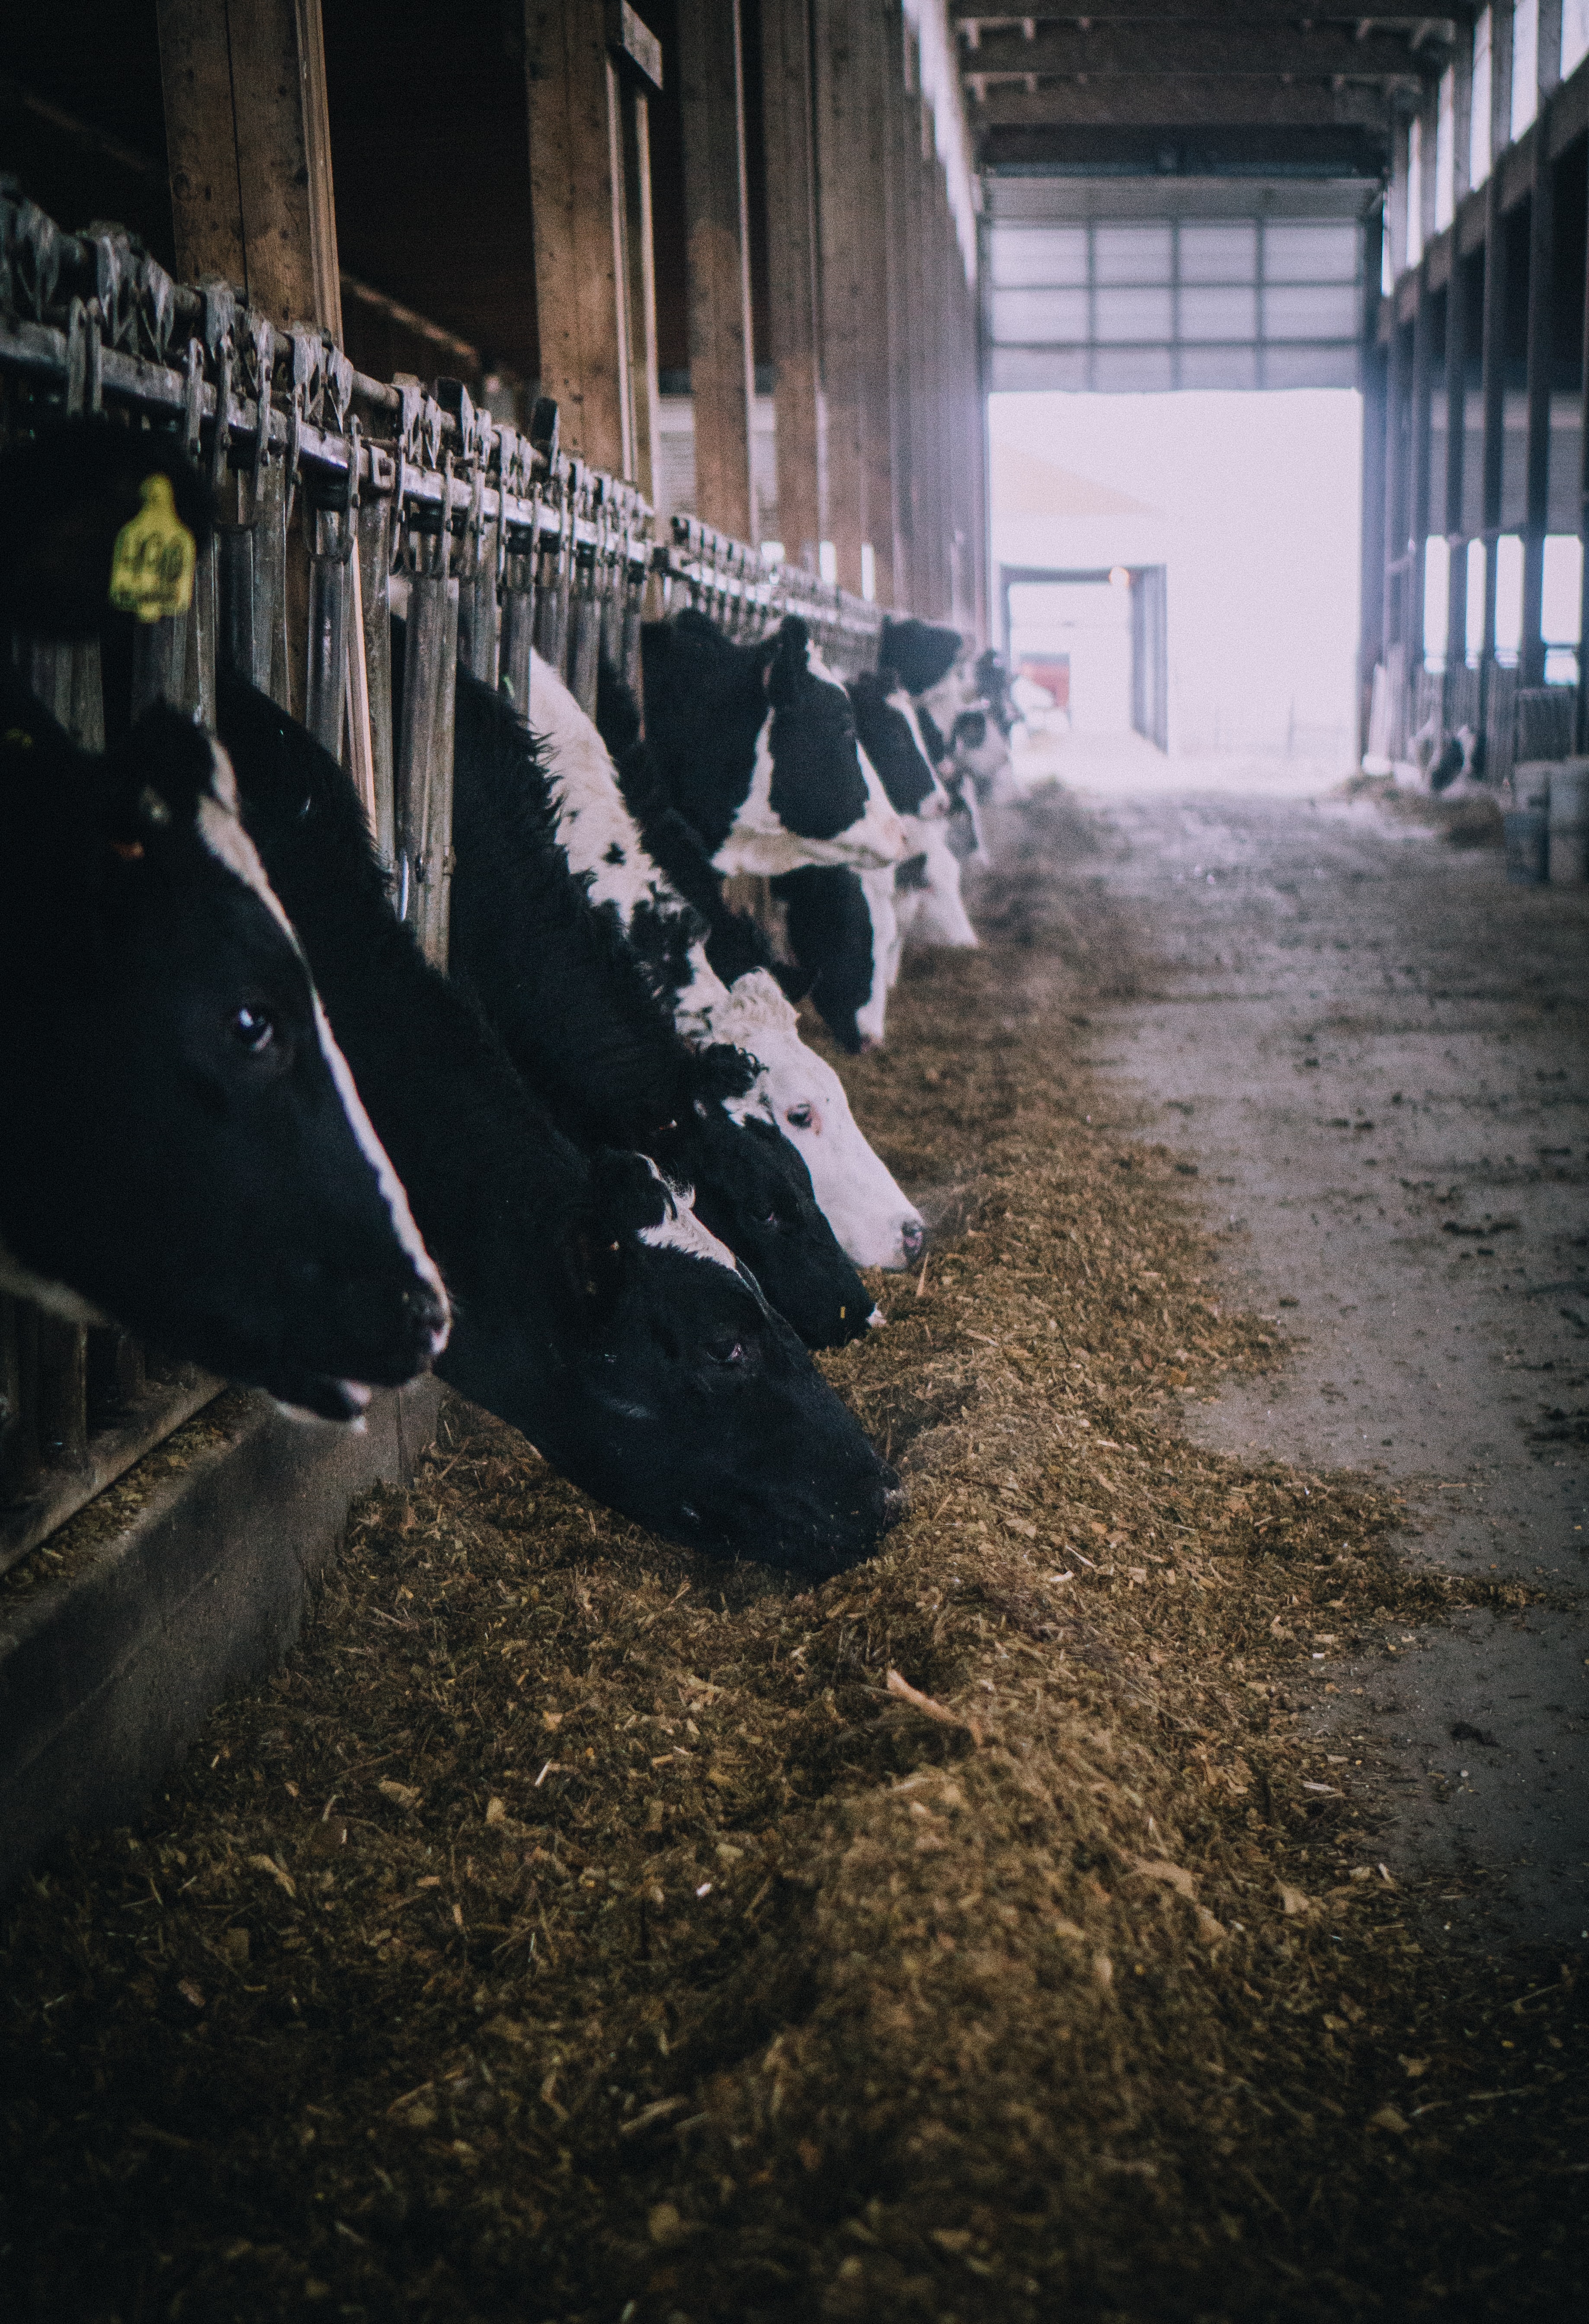 Why choose Corn Silage for cows feed?